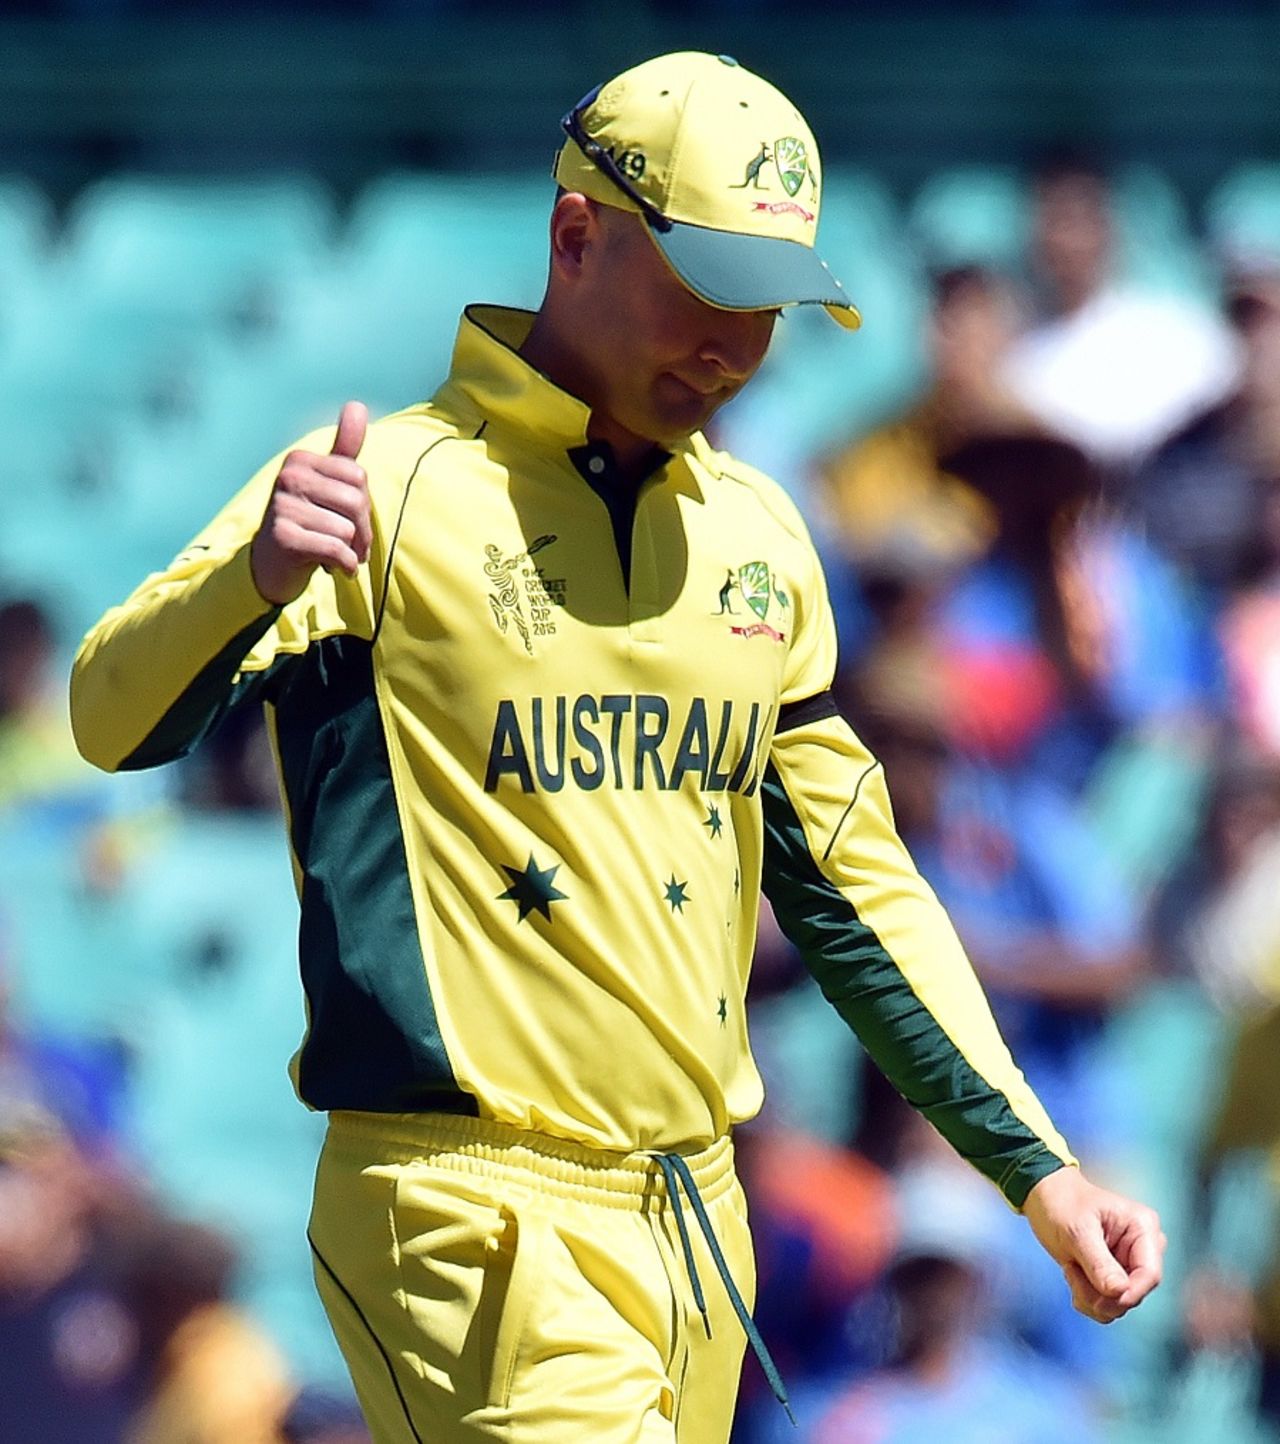 Thumbs up: Michael Clarke was pleased after winning the toss, Australia v India, World Cup 2015, 2nd semi-final, Sydney, March 26, 2015